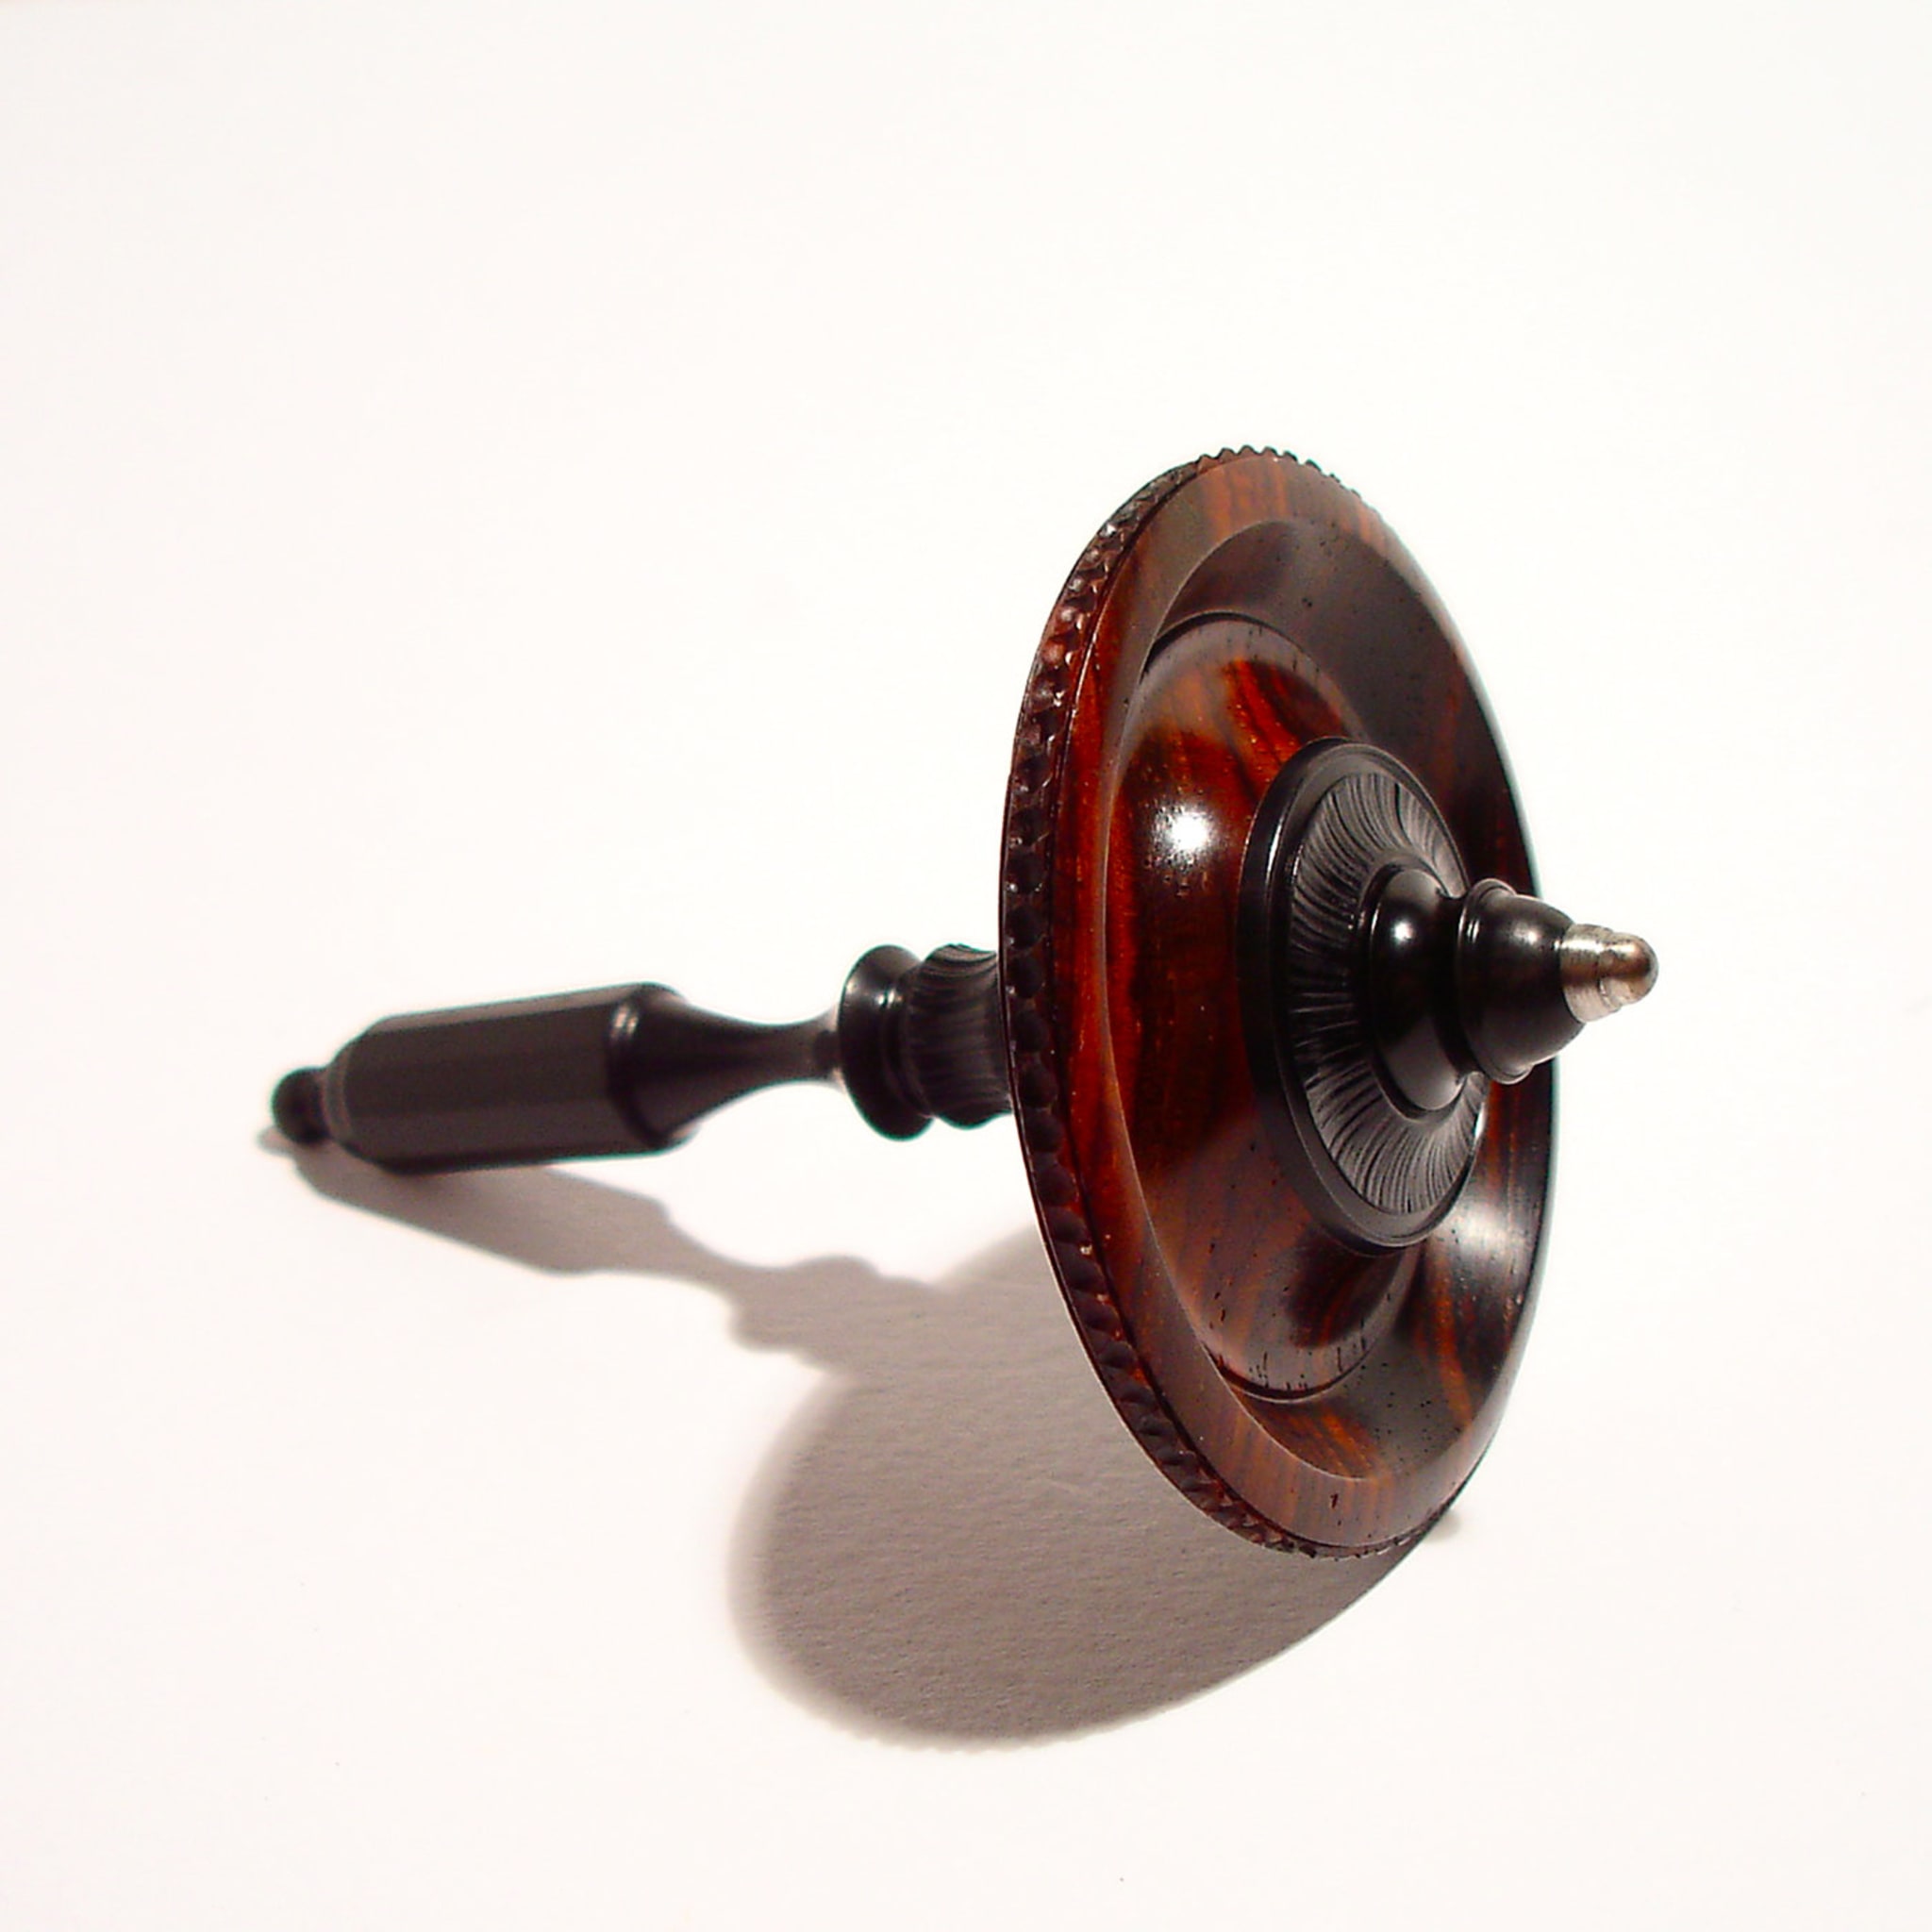 Ebony and Cocobolo Spinning Top - Alternative view 2